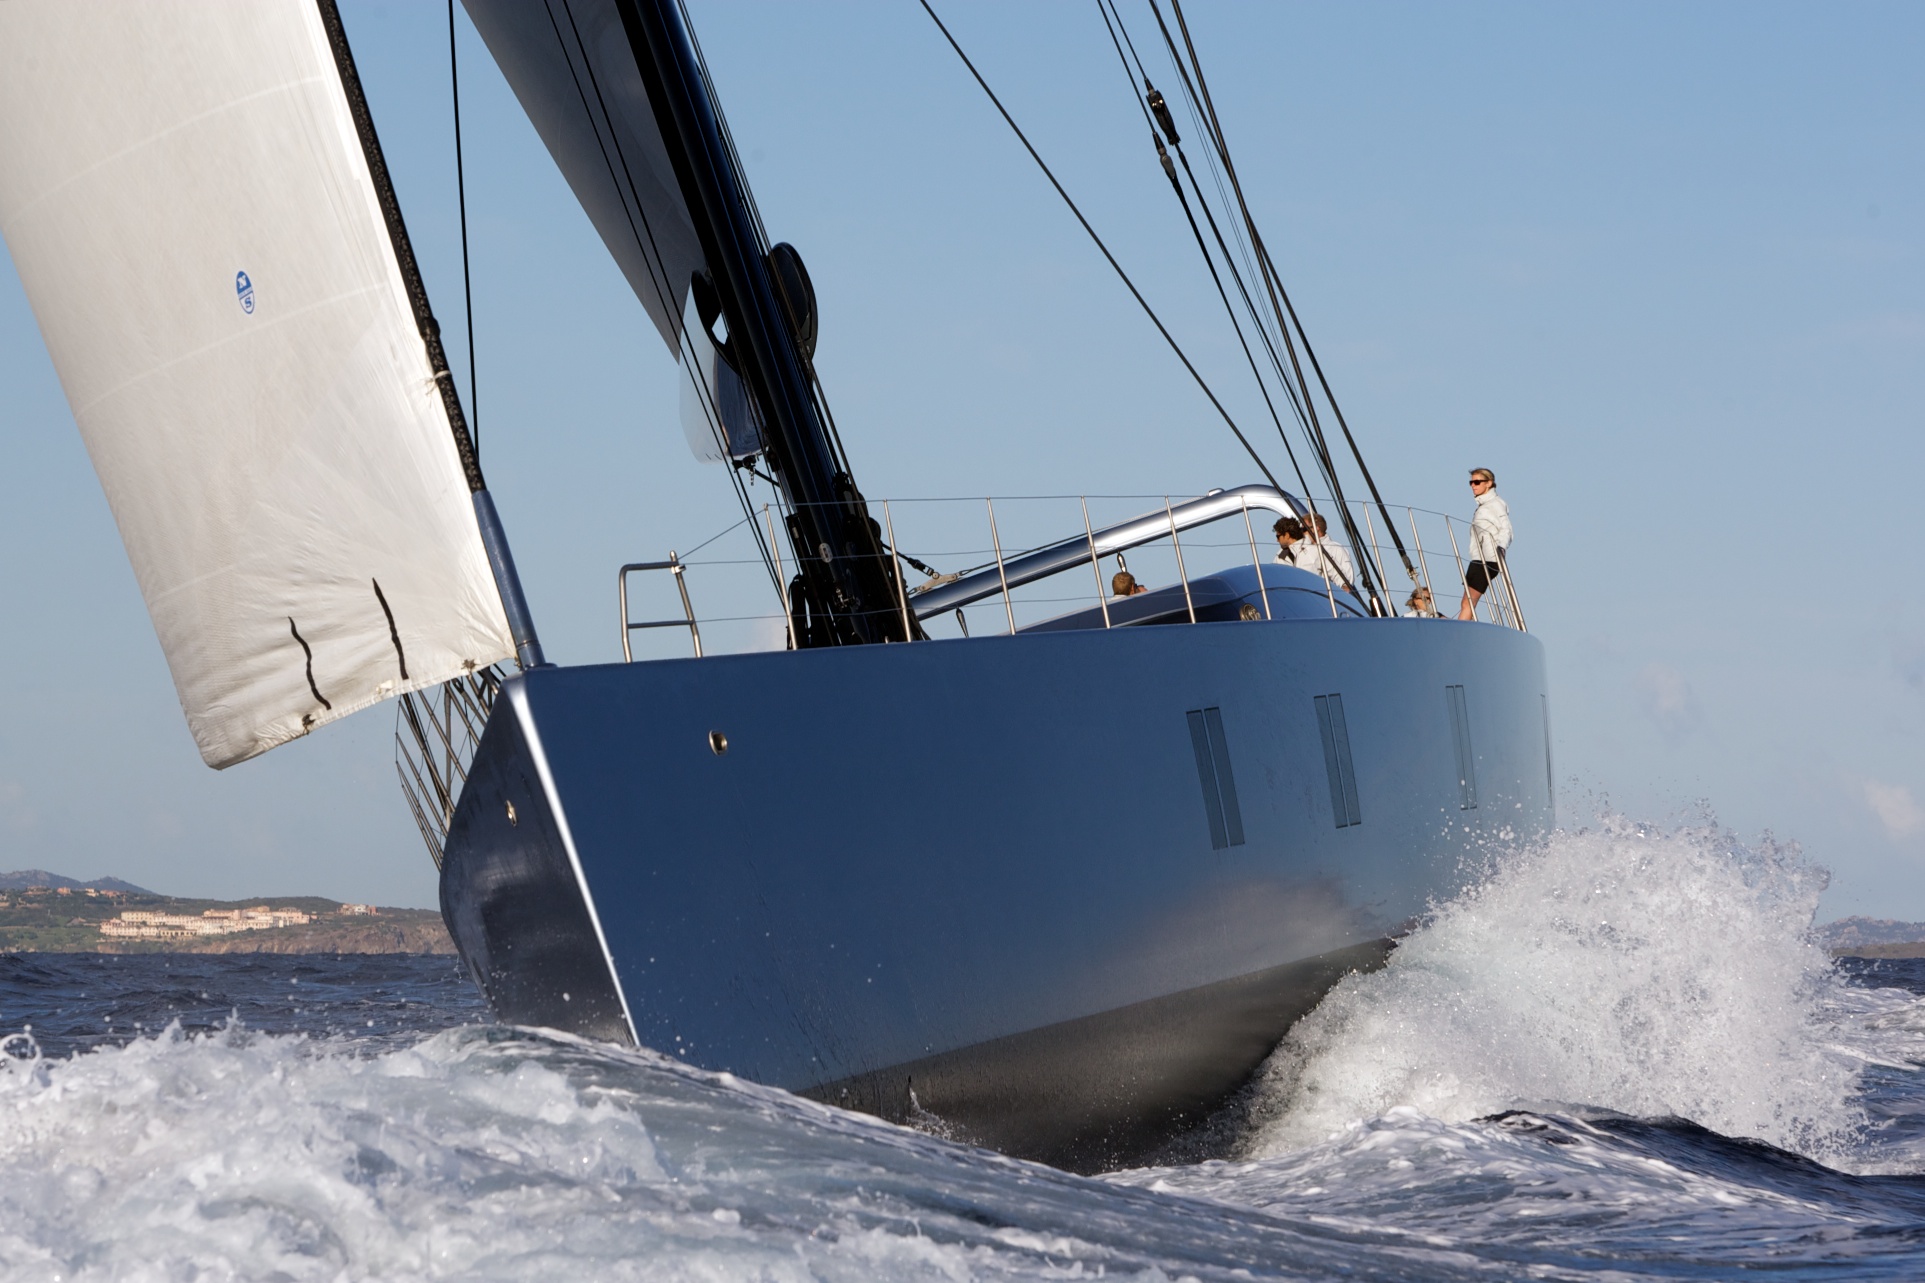 Charter yacht available in the Mediterranean - built by Vitters 